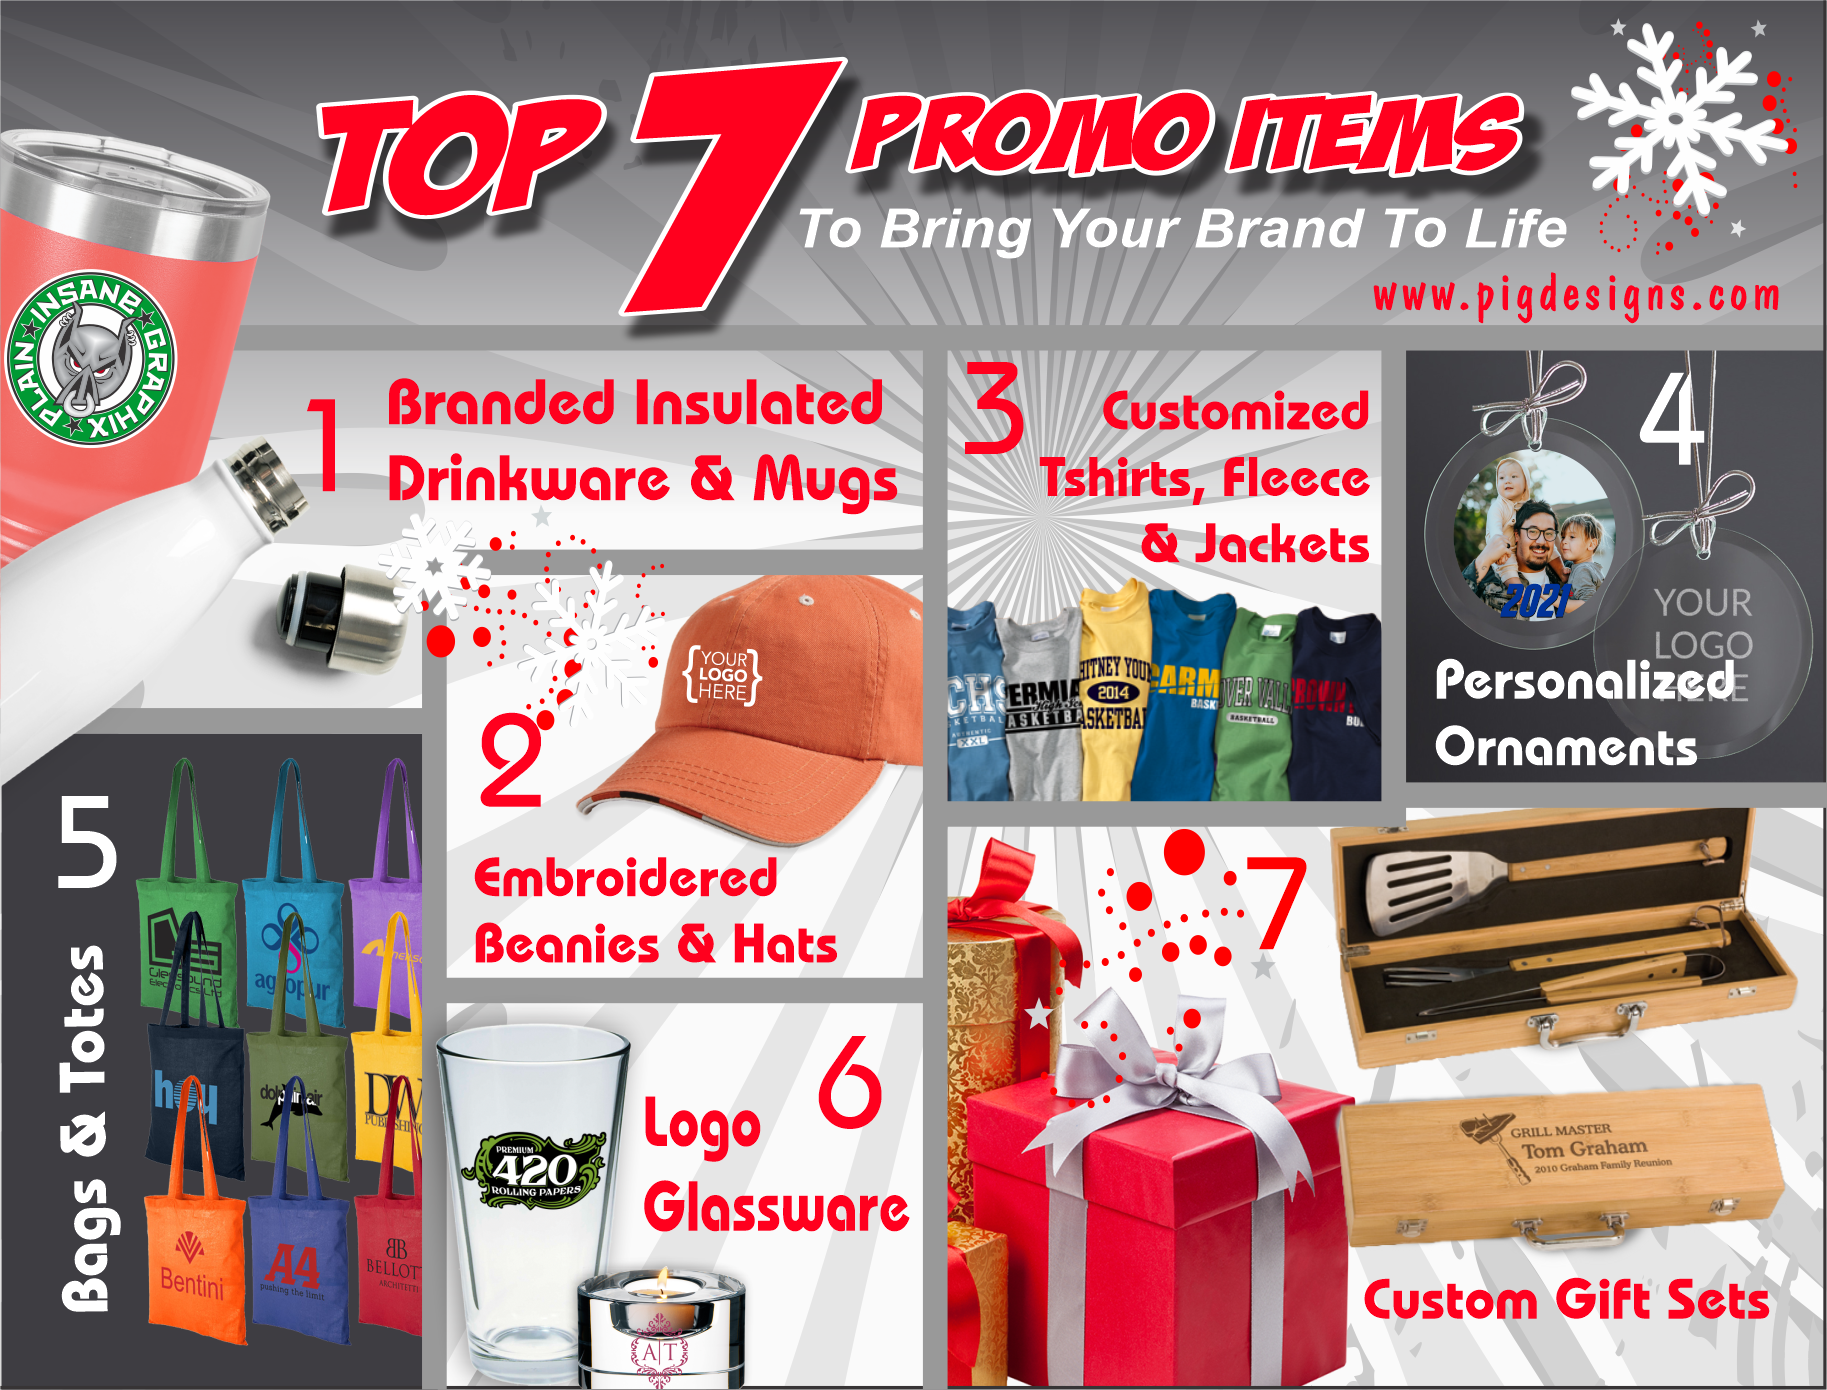 Top 7 promo items for holiday giving